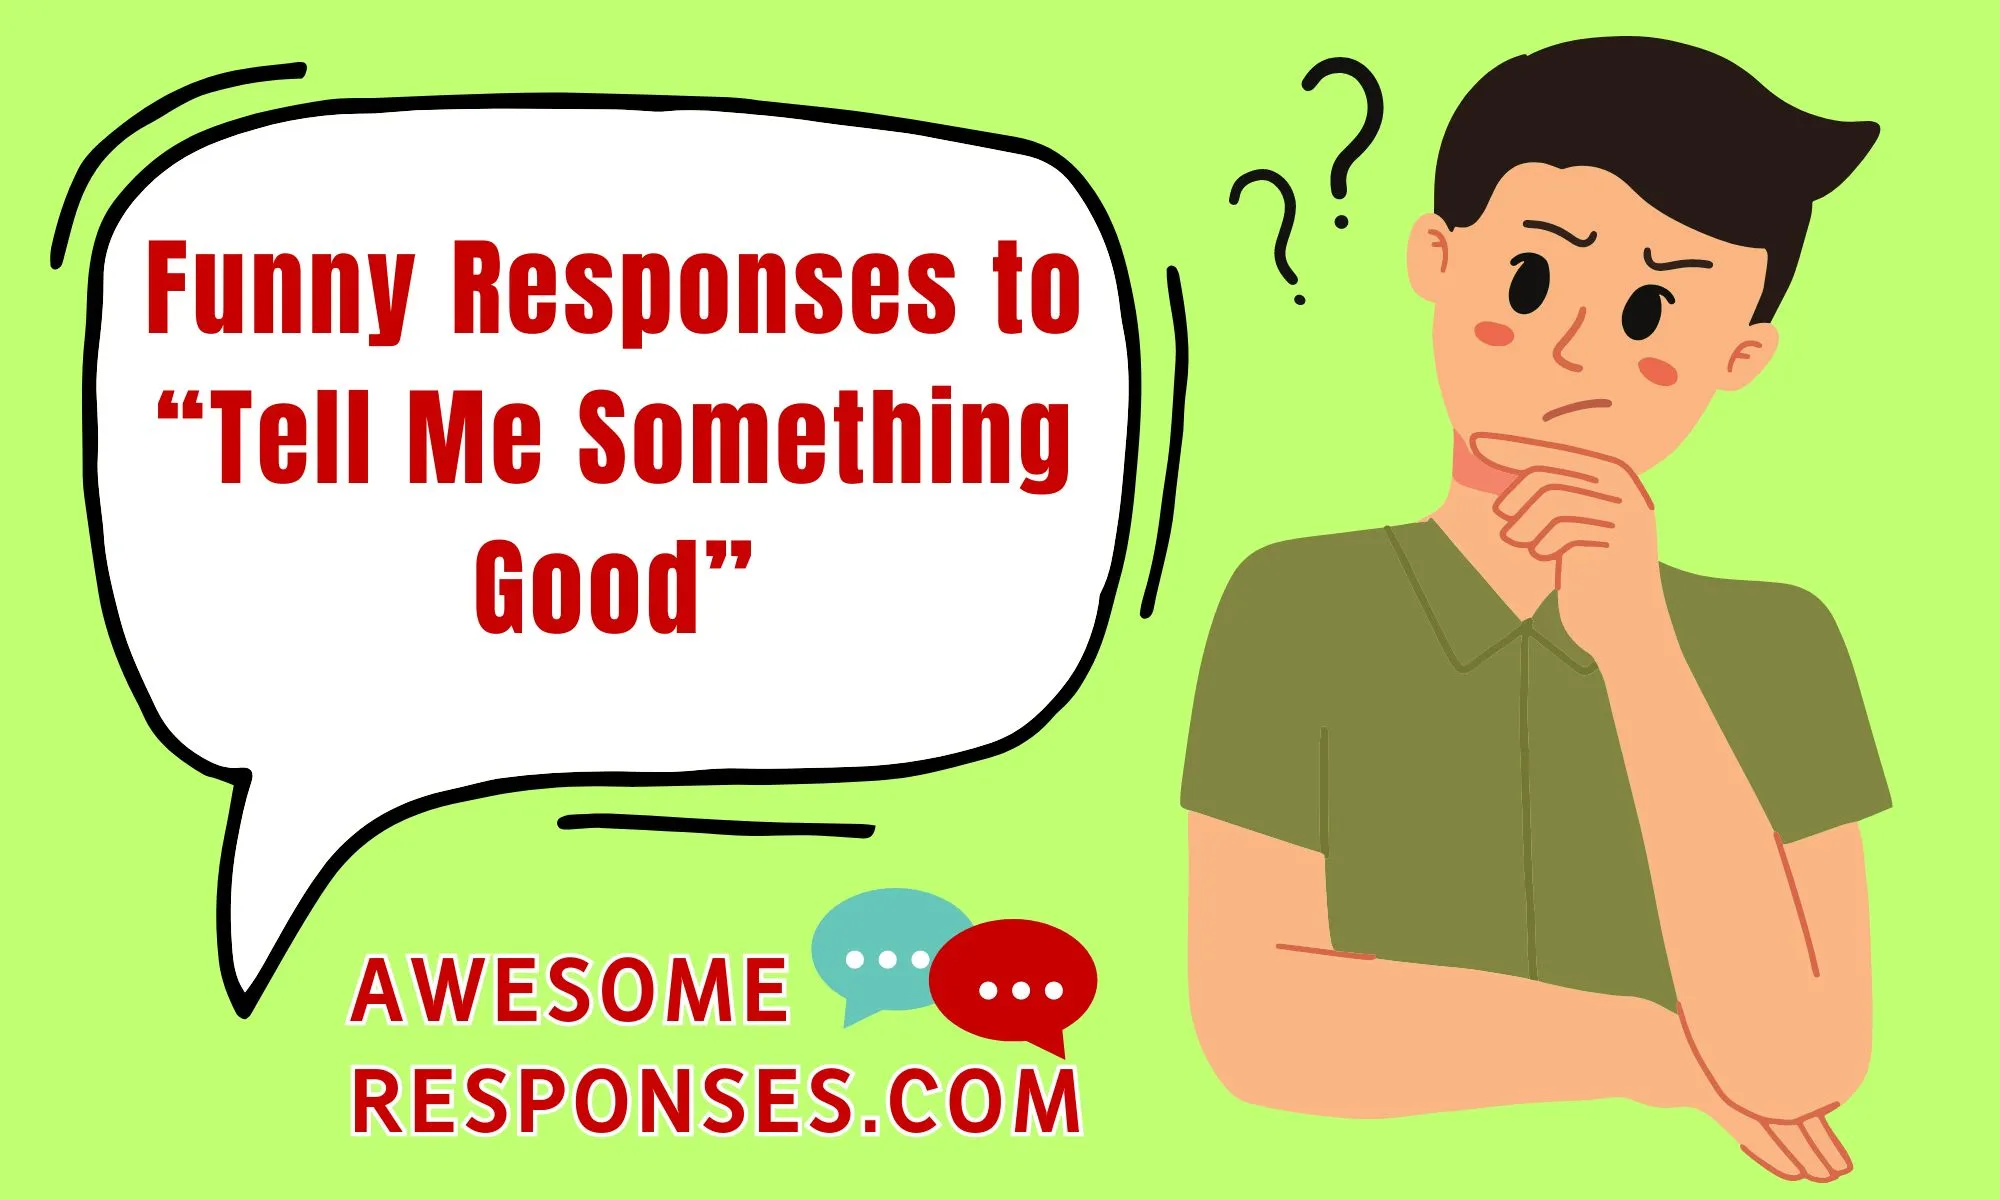 Funny Responses to “Tell Me Something Good”